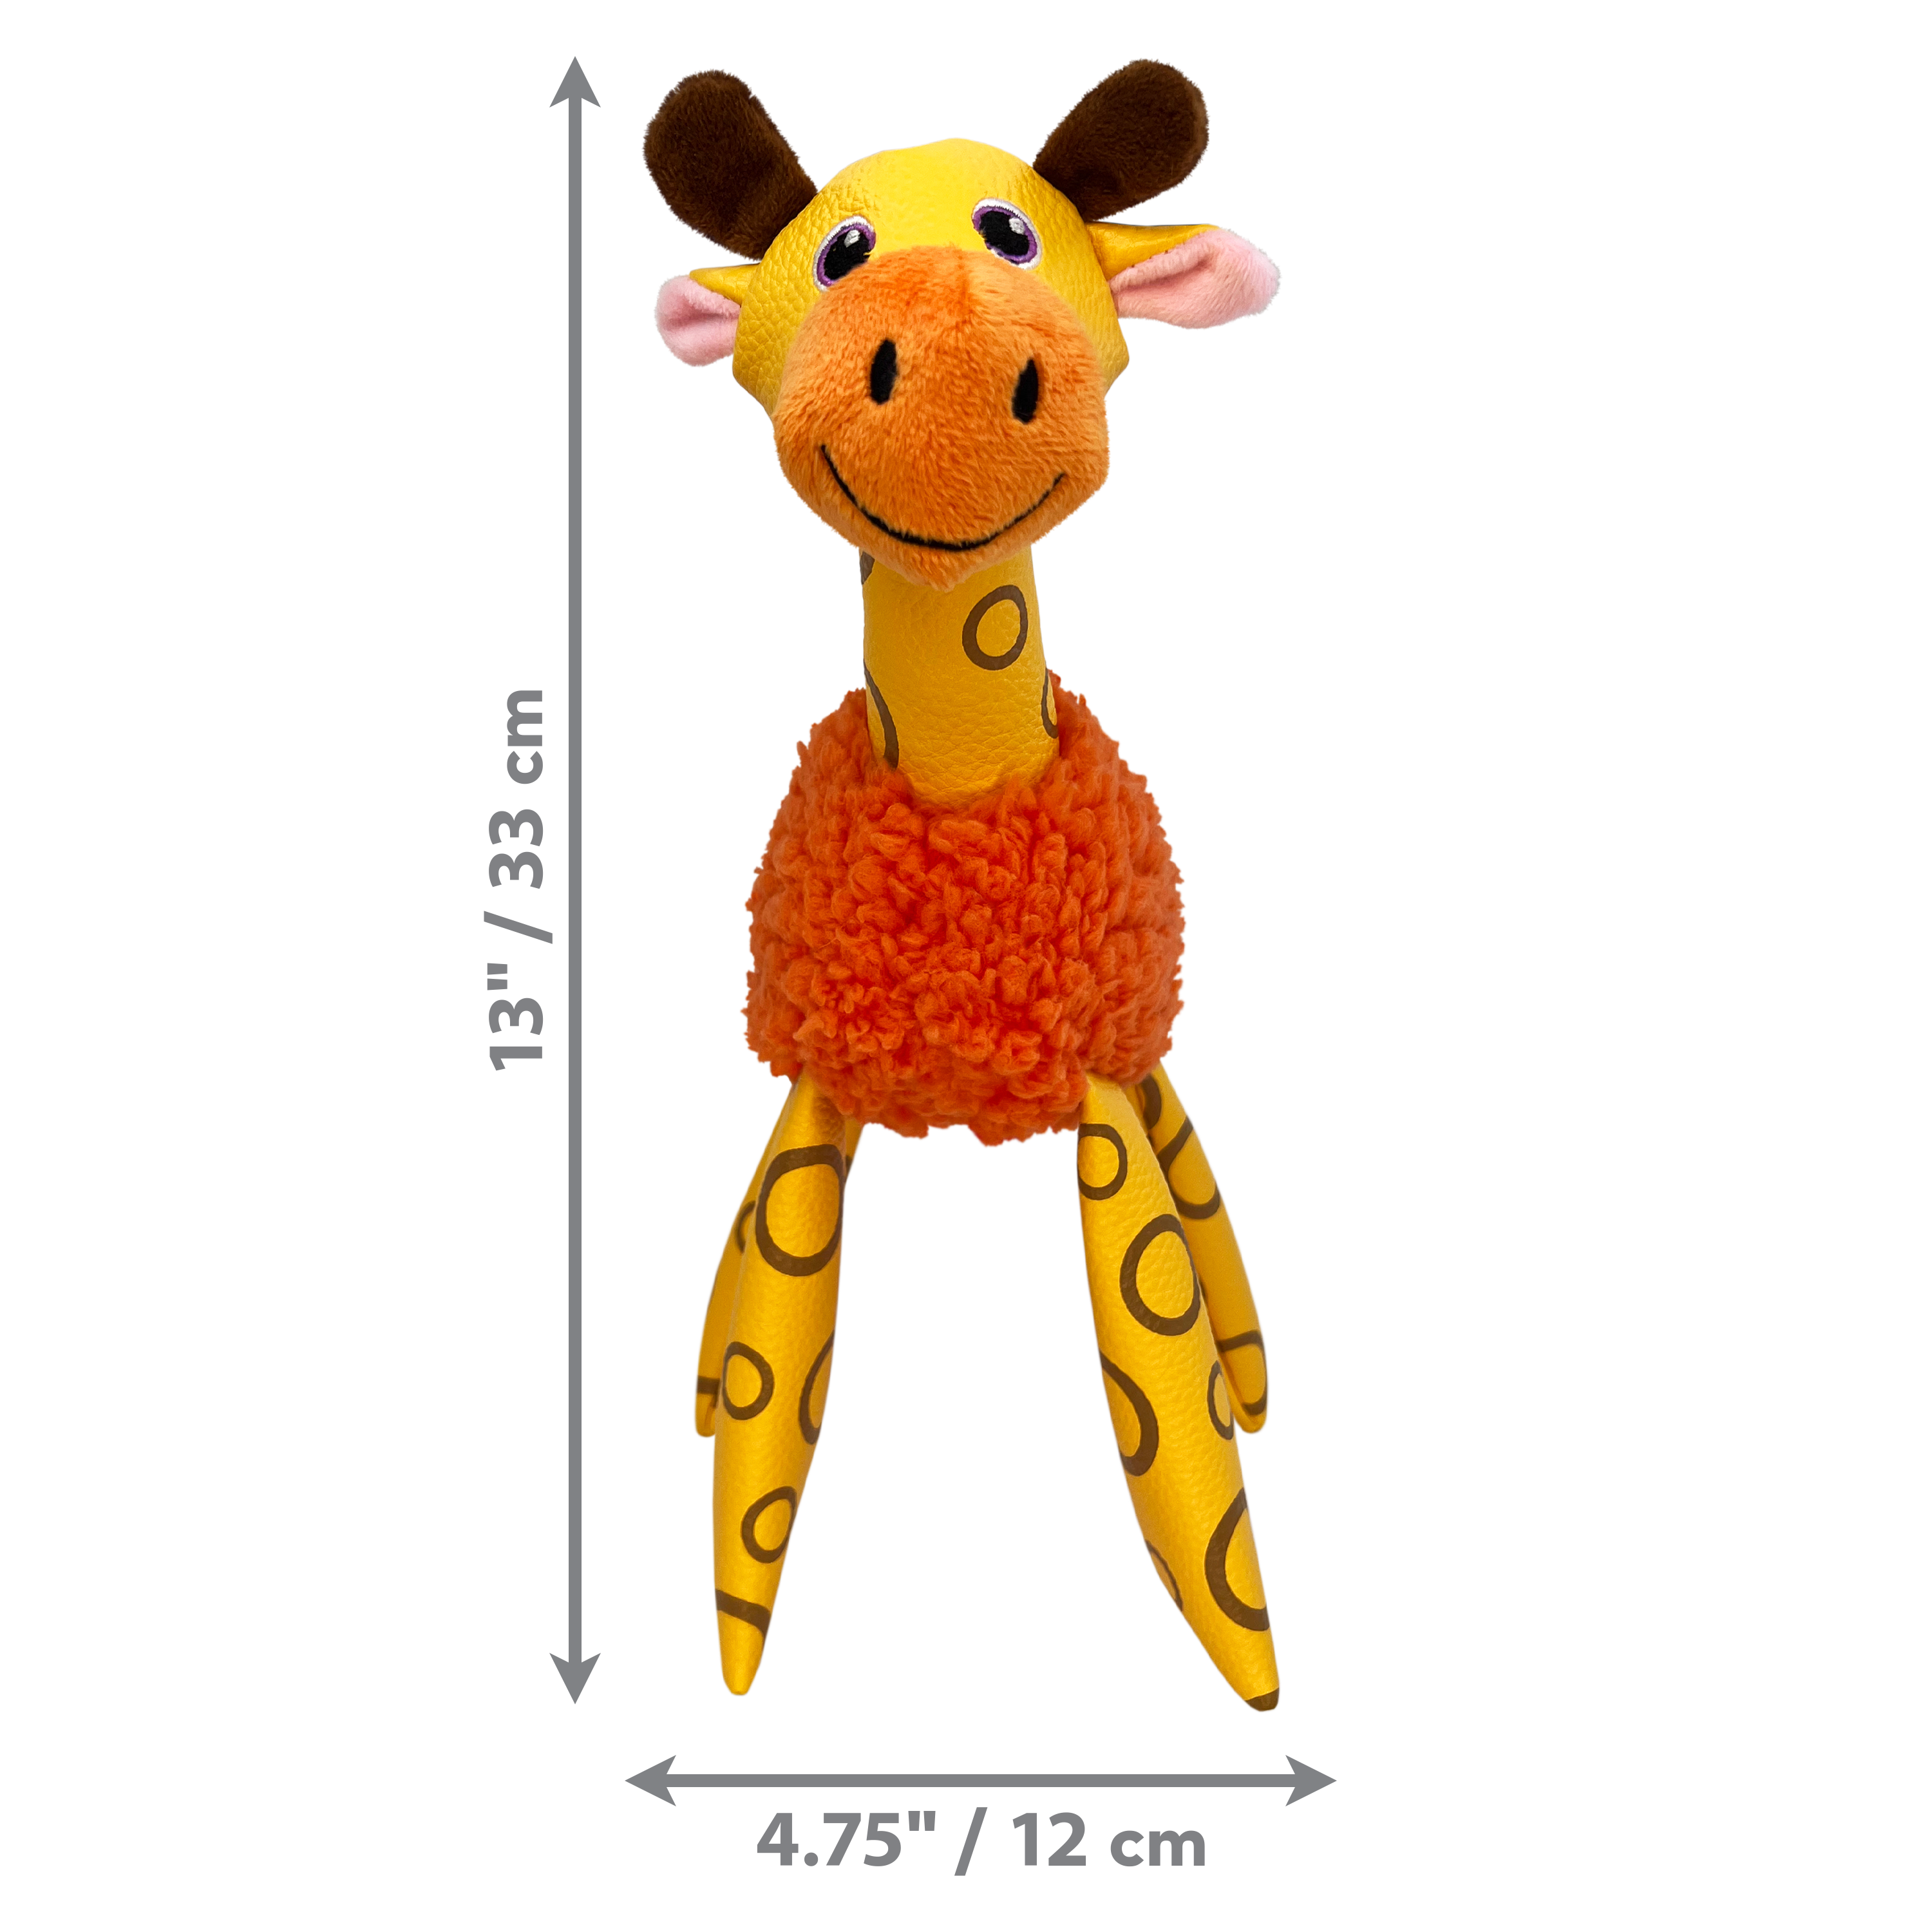 Floofs Shakers Giraffe dimoffpack product image